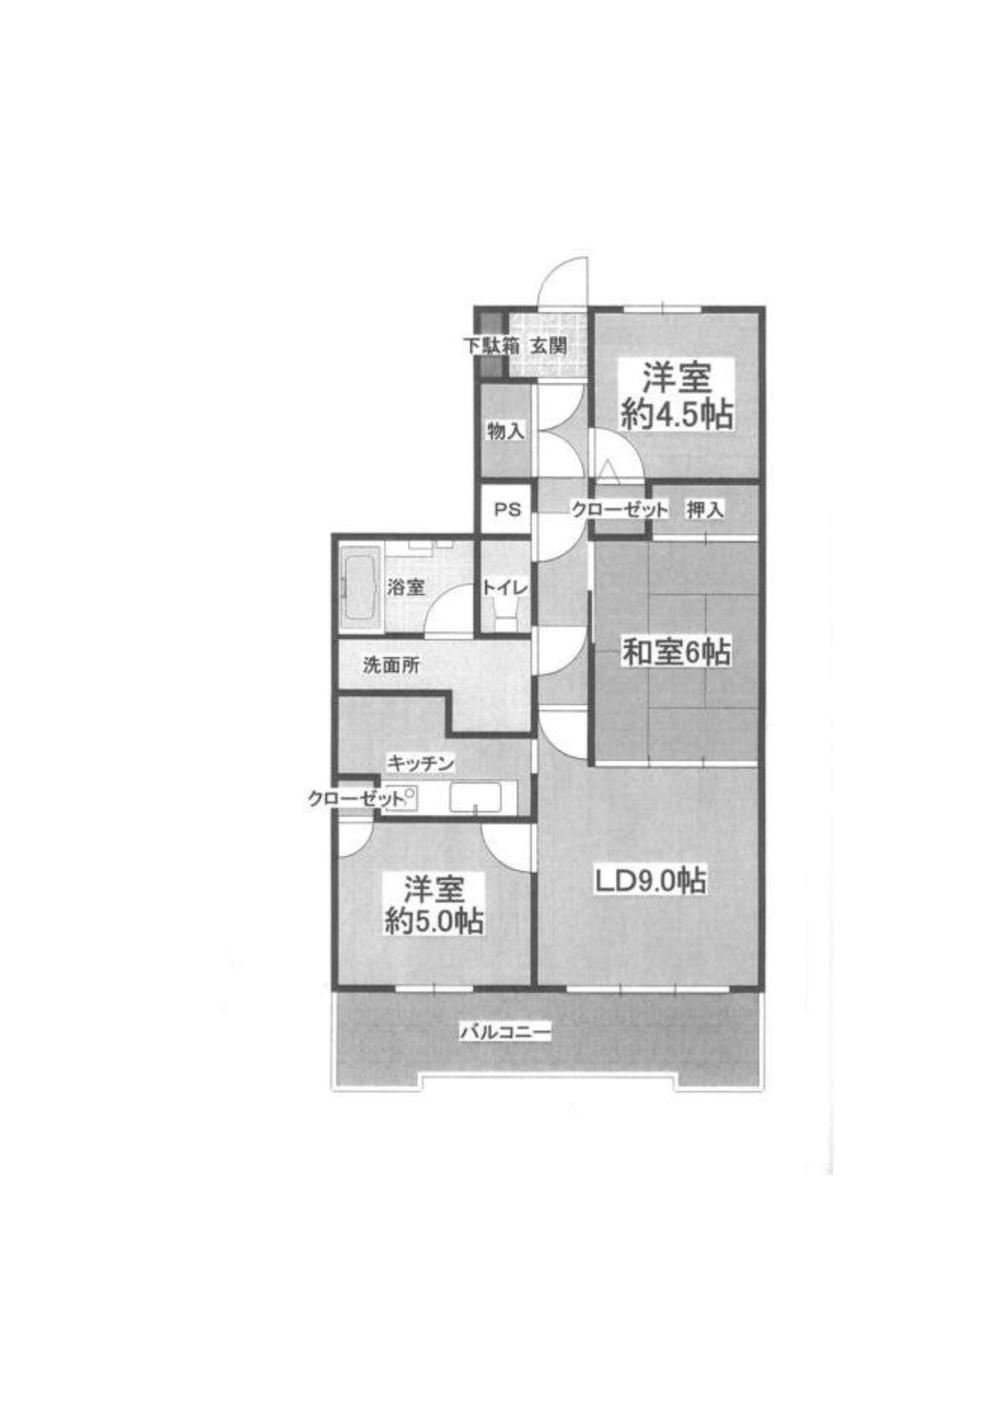 Floor plan. 3LDK, Price 13.8 million yen, Occupied area 64.65 sq m , Balcony area 10.45 sq m had been cleanly dwelling